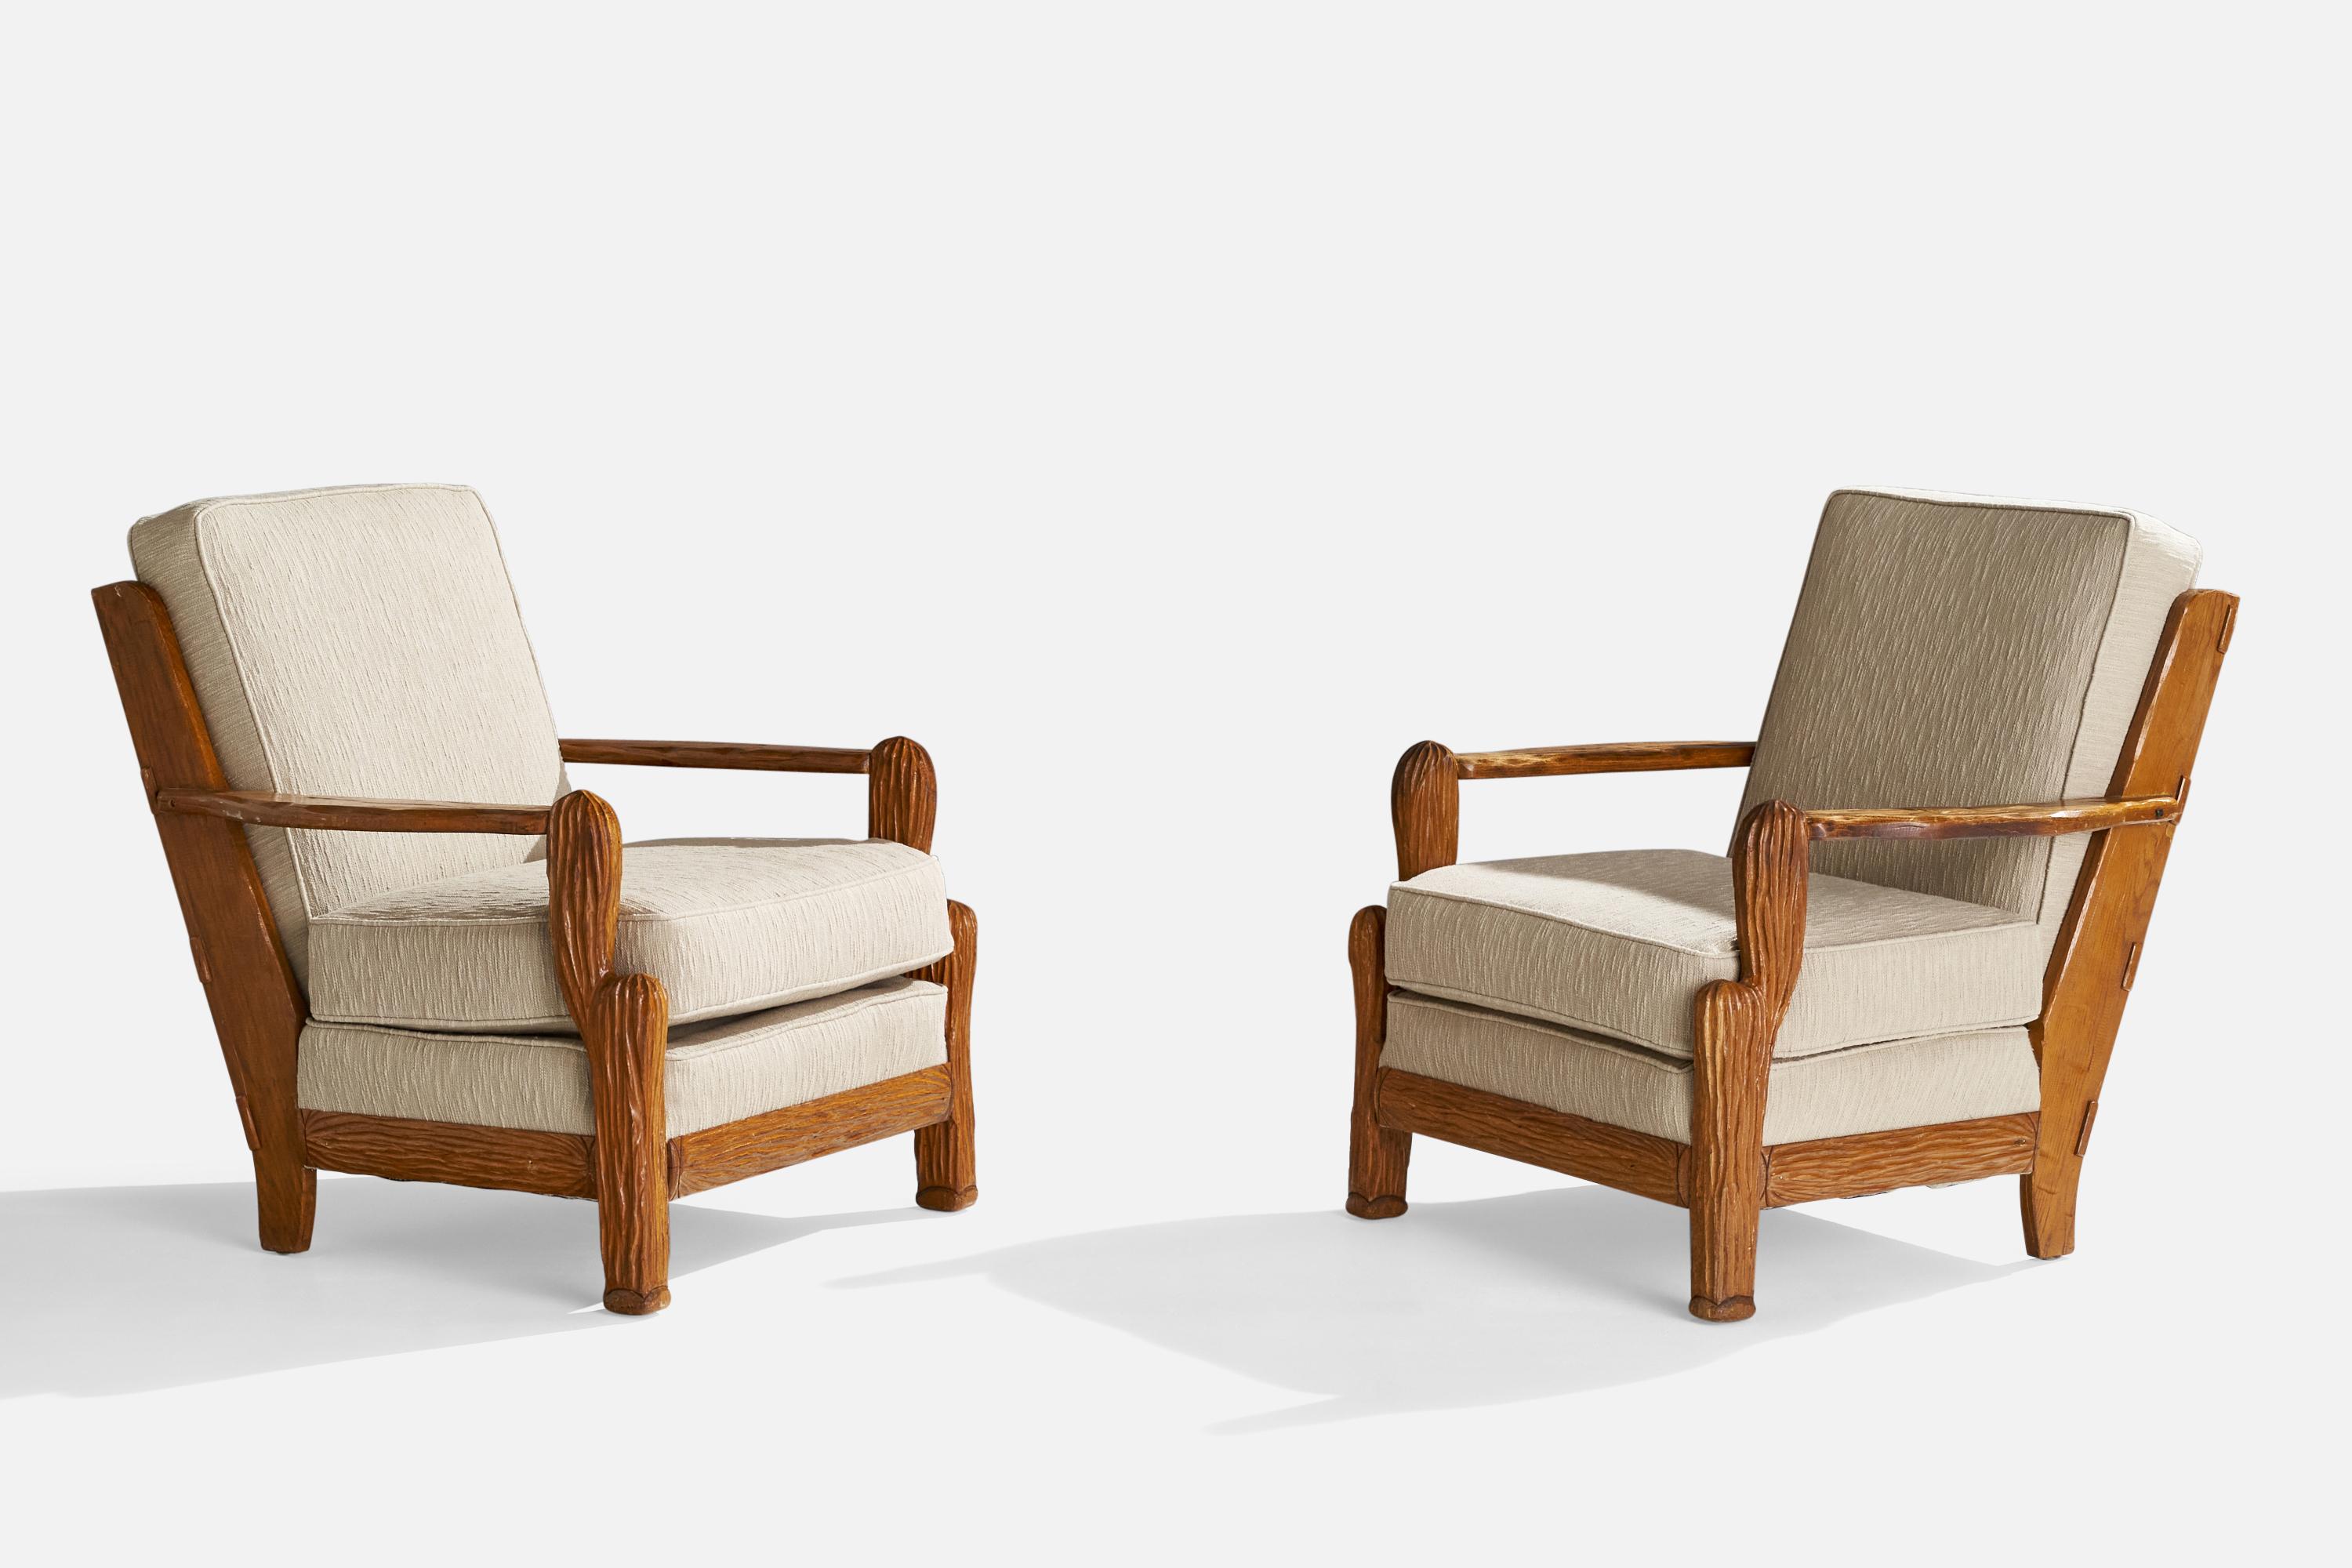 A pair of oak and off-white fabric lounge chairs designed and produced by A. Brandt Ranch Oak, USA, c. 1950s.

Seat height: 18”